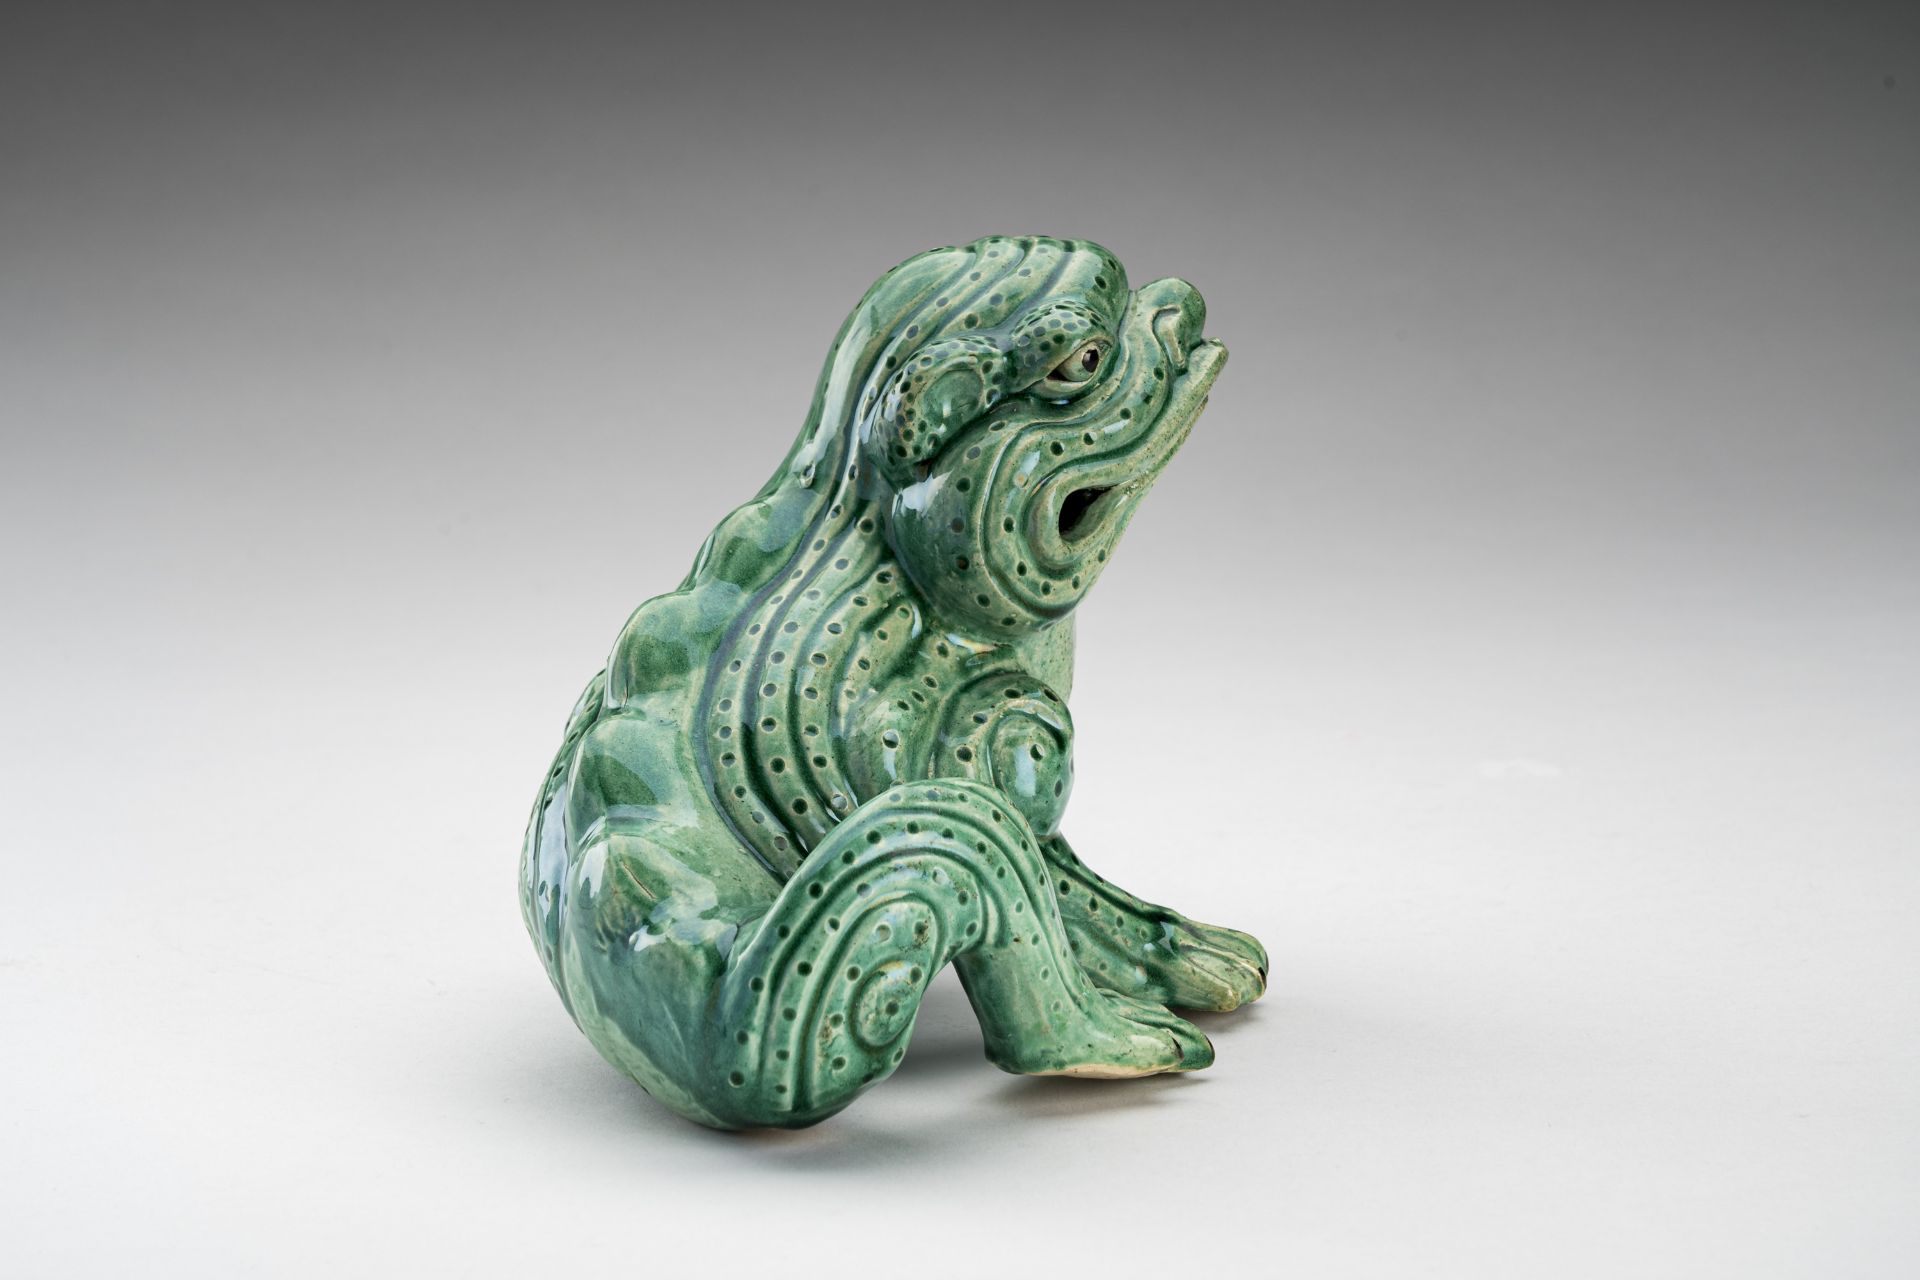 A RARE GREEN GLAZED POTTERY FIGURE OF THE THREE-LEGED TOAD - Image 3 of 9